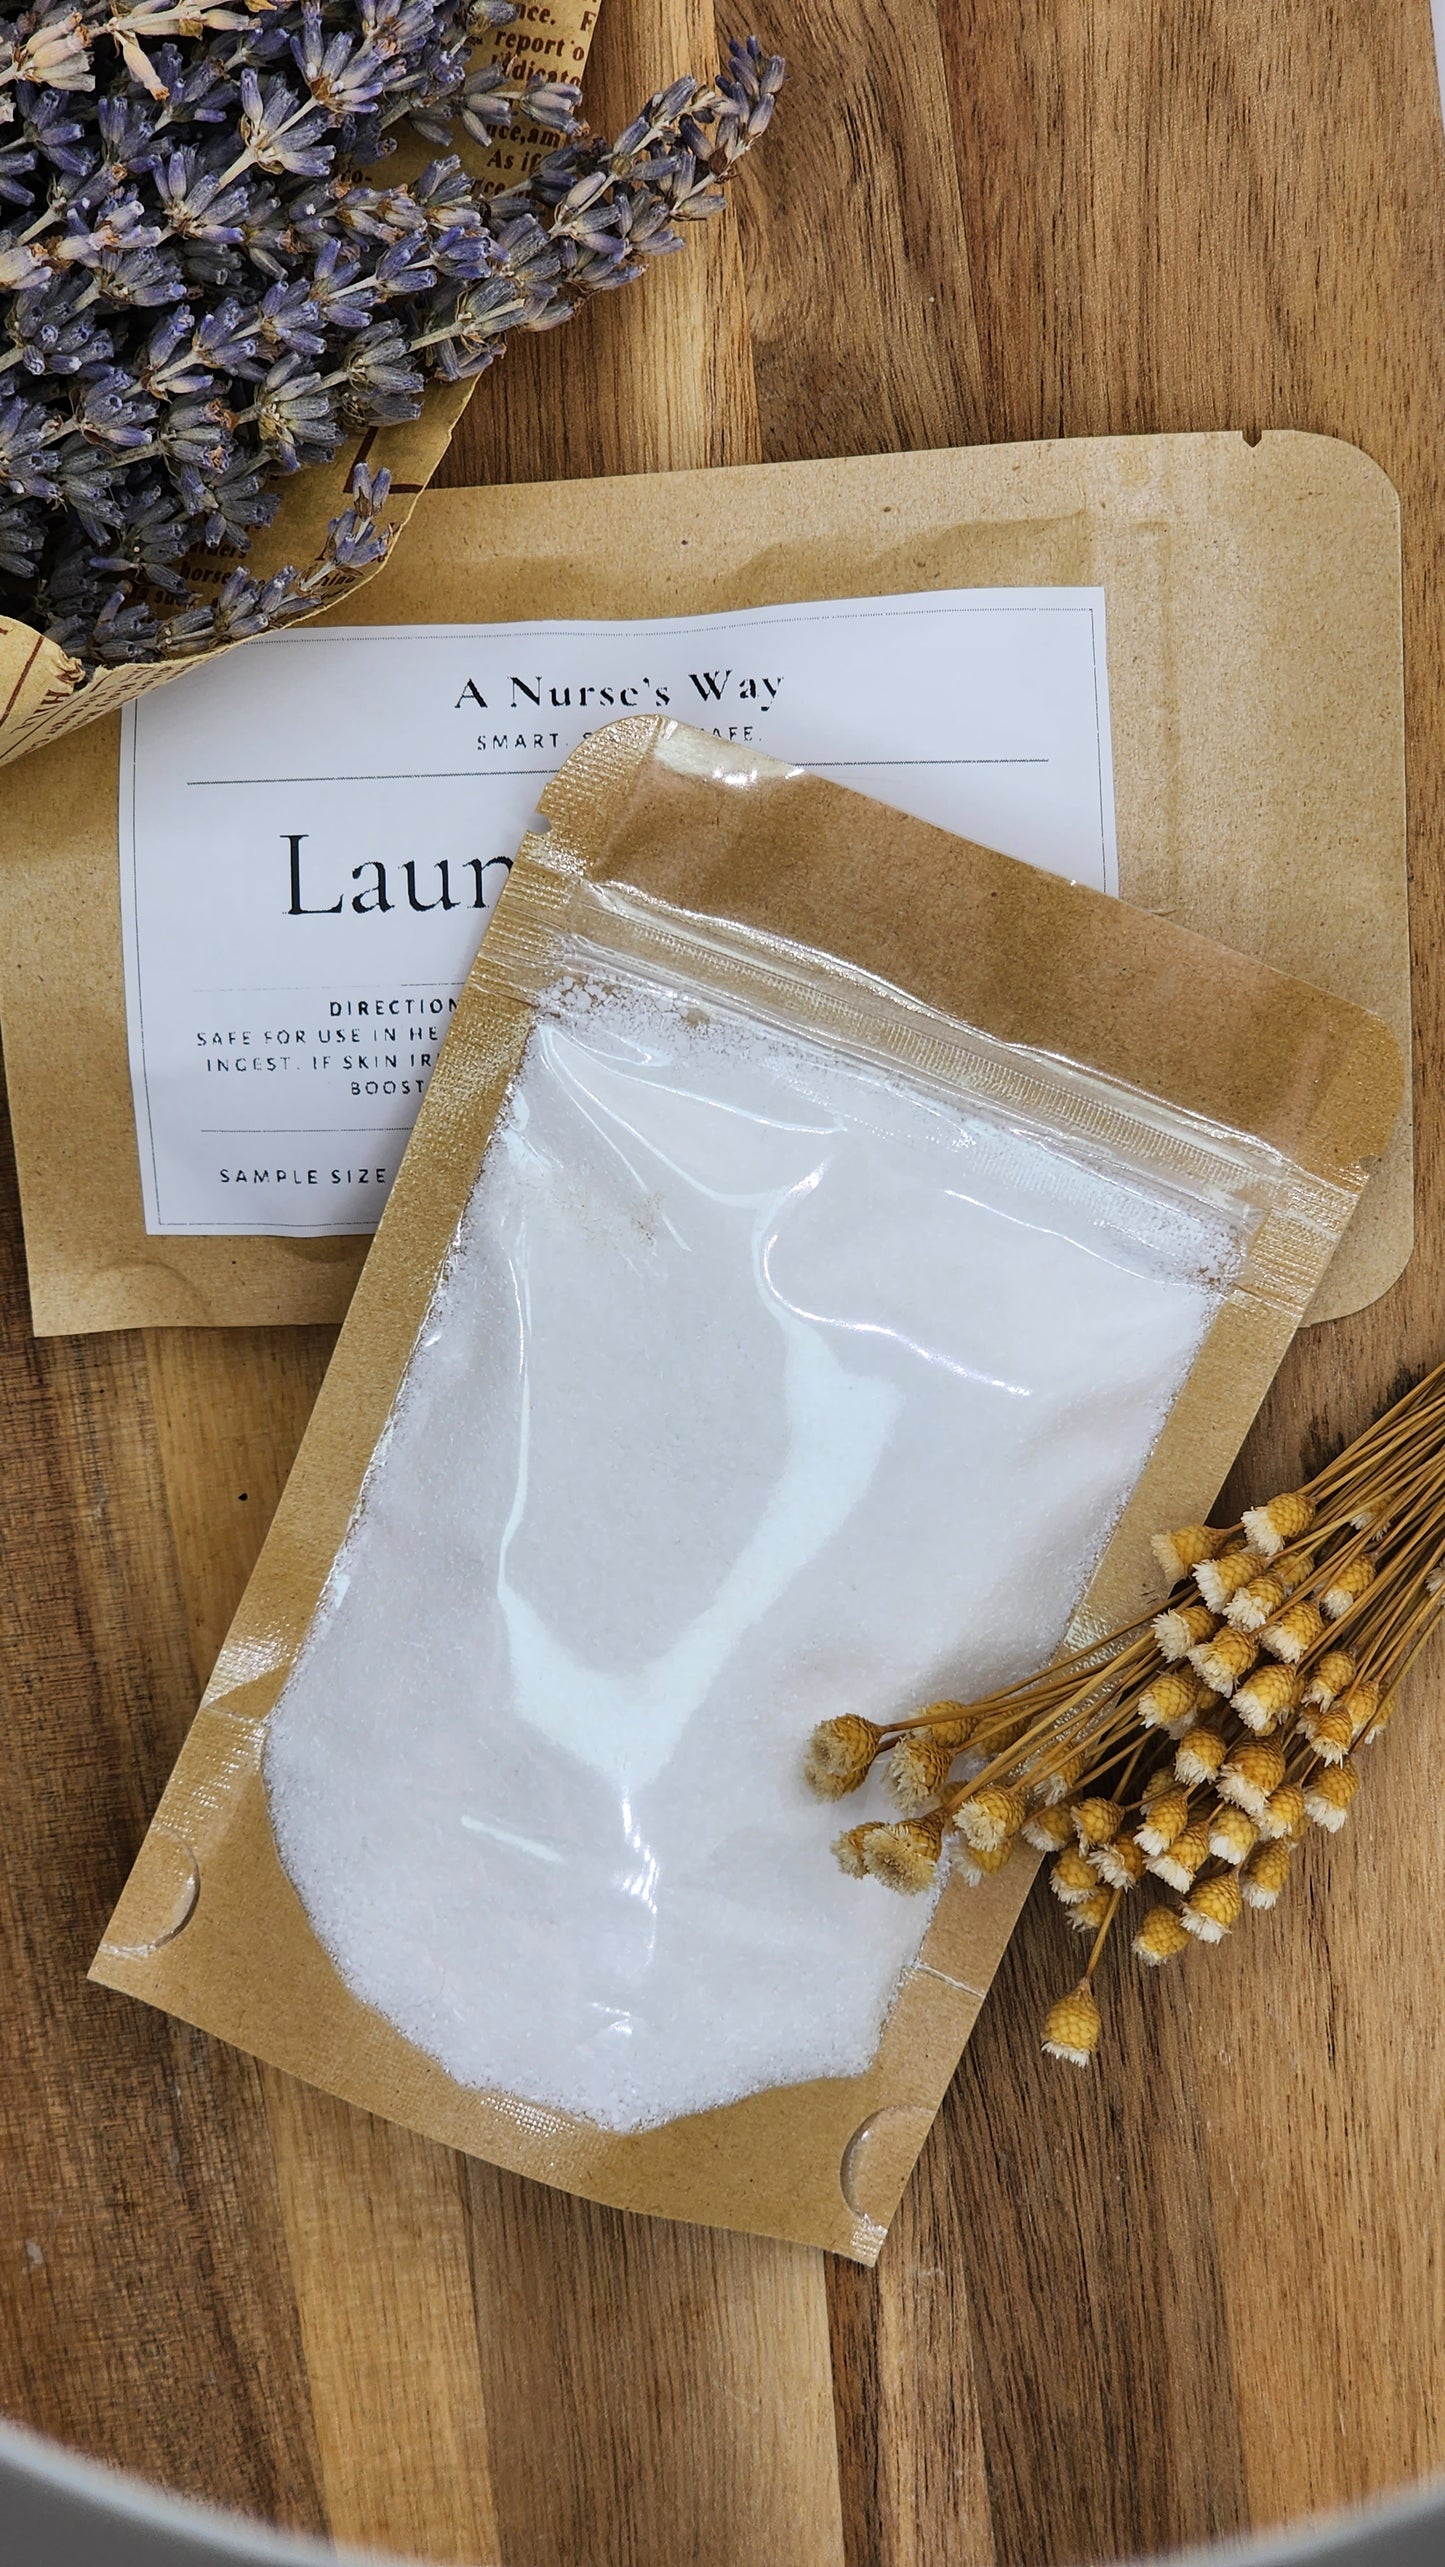 Scent-Free Handcrafted Laundry Soap